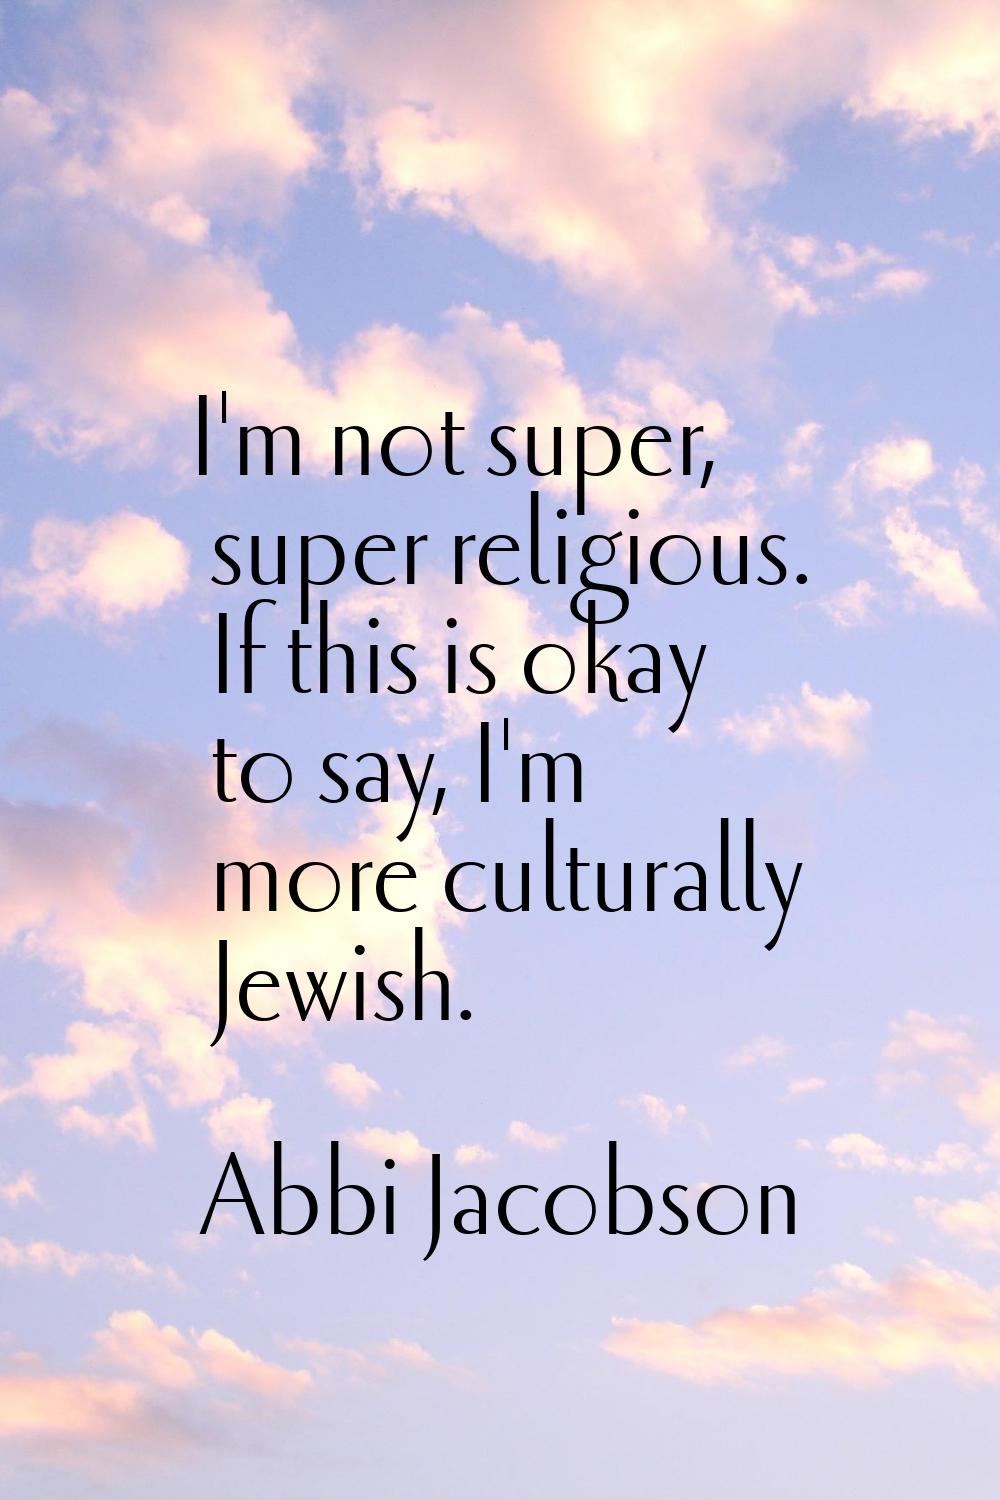 I'm not super, super religious. If this is okay to say, I'm more culturally Jewish.